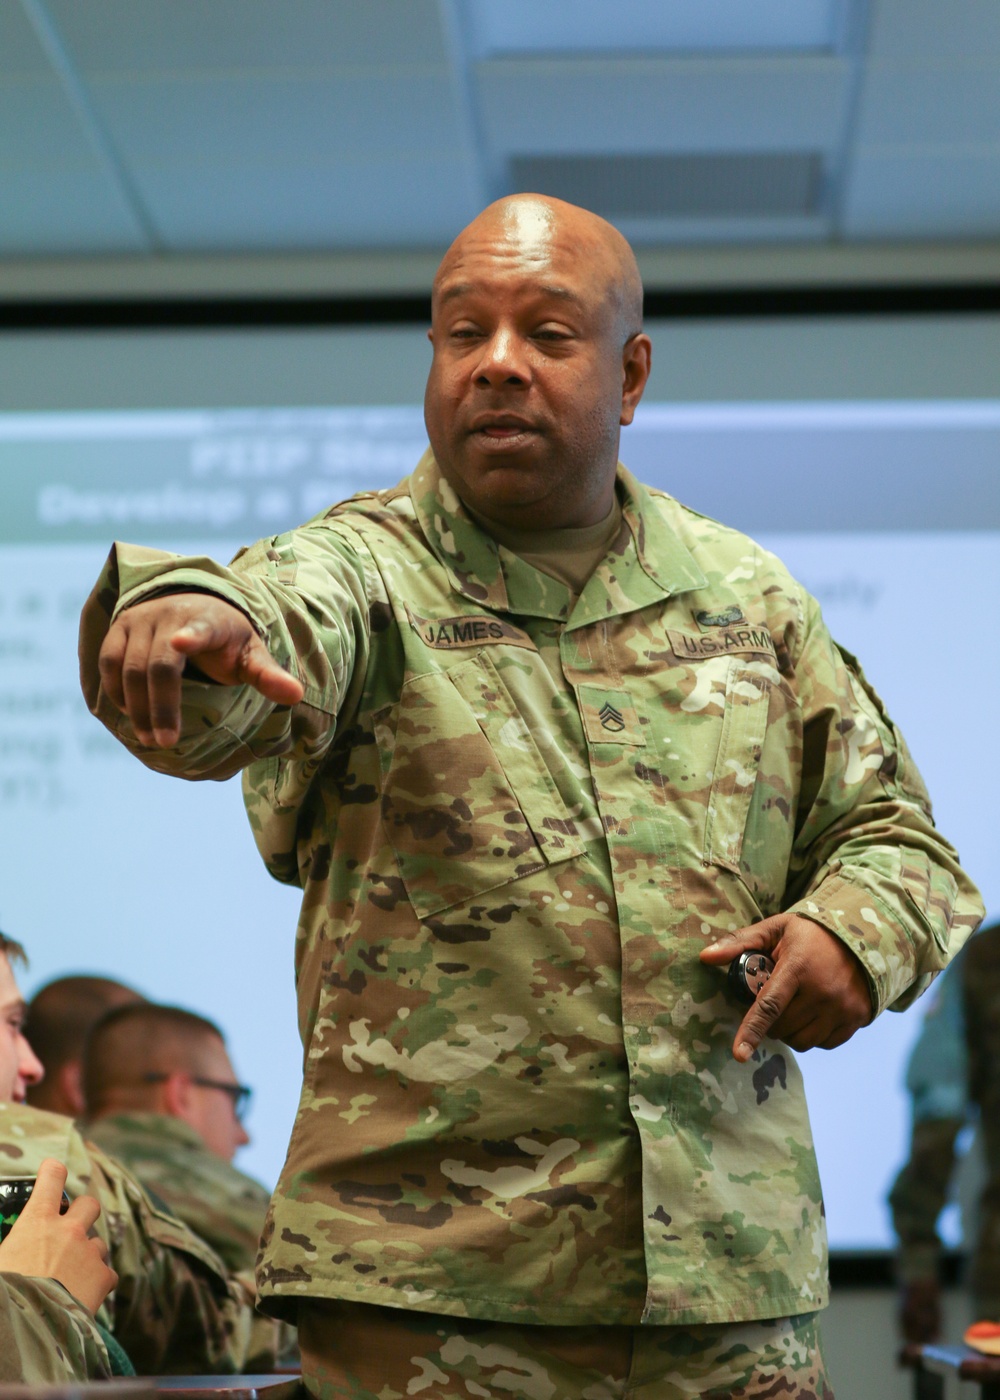 Underneath the uniform: Fort Carson leader discovers inner perseverance